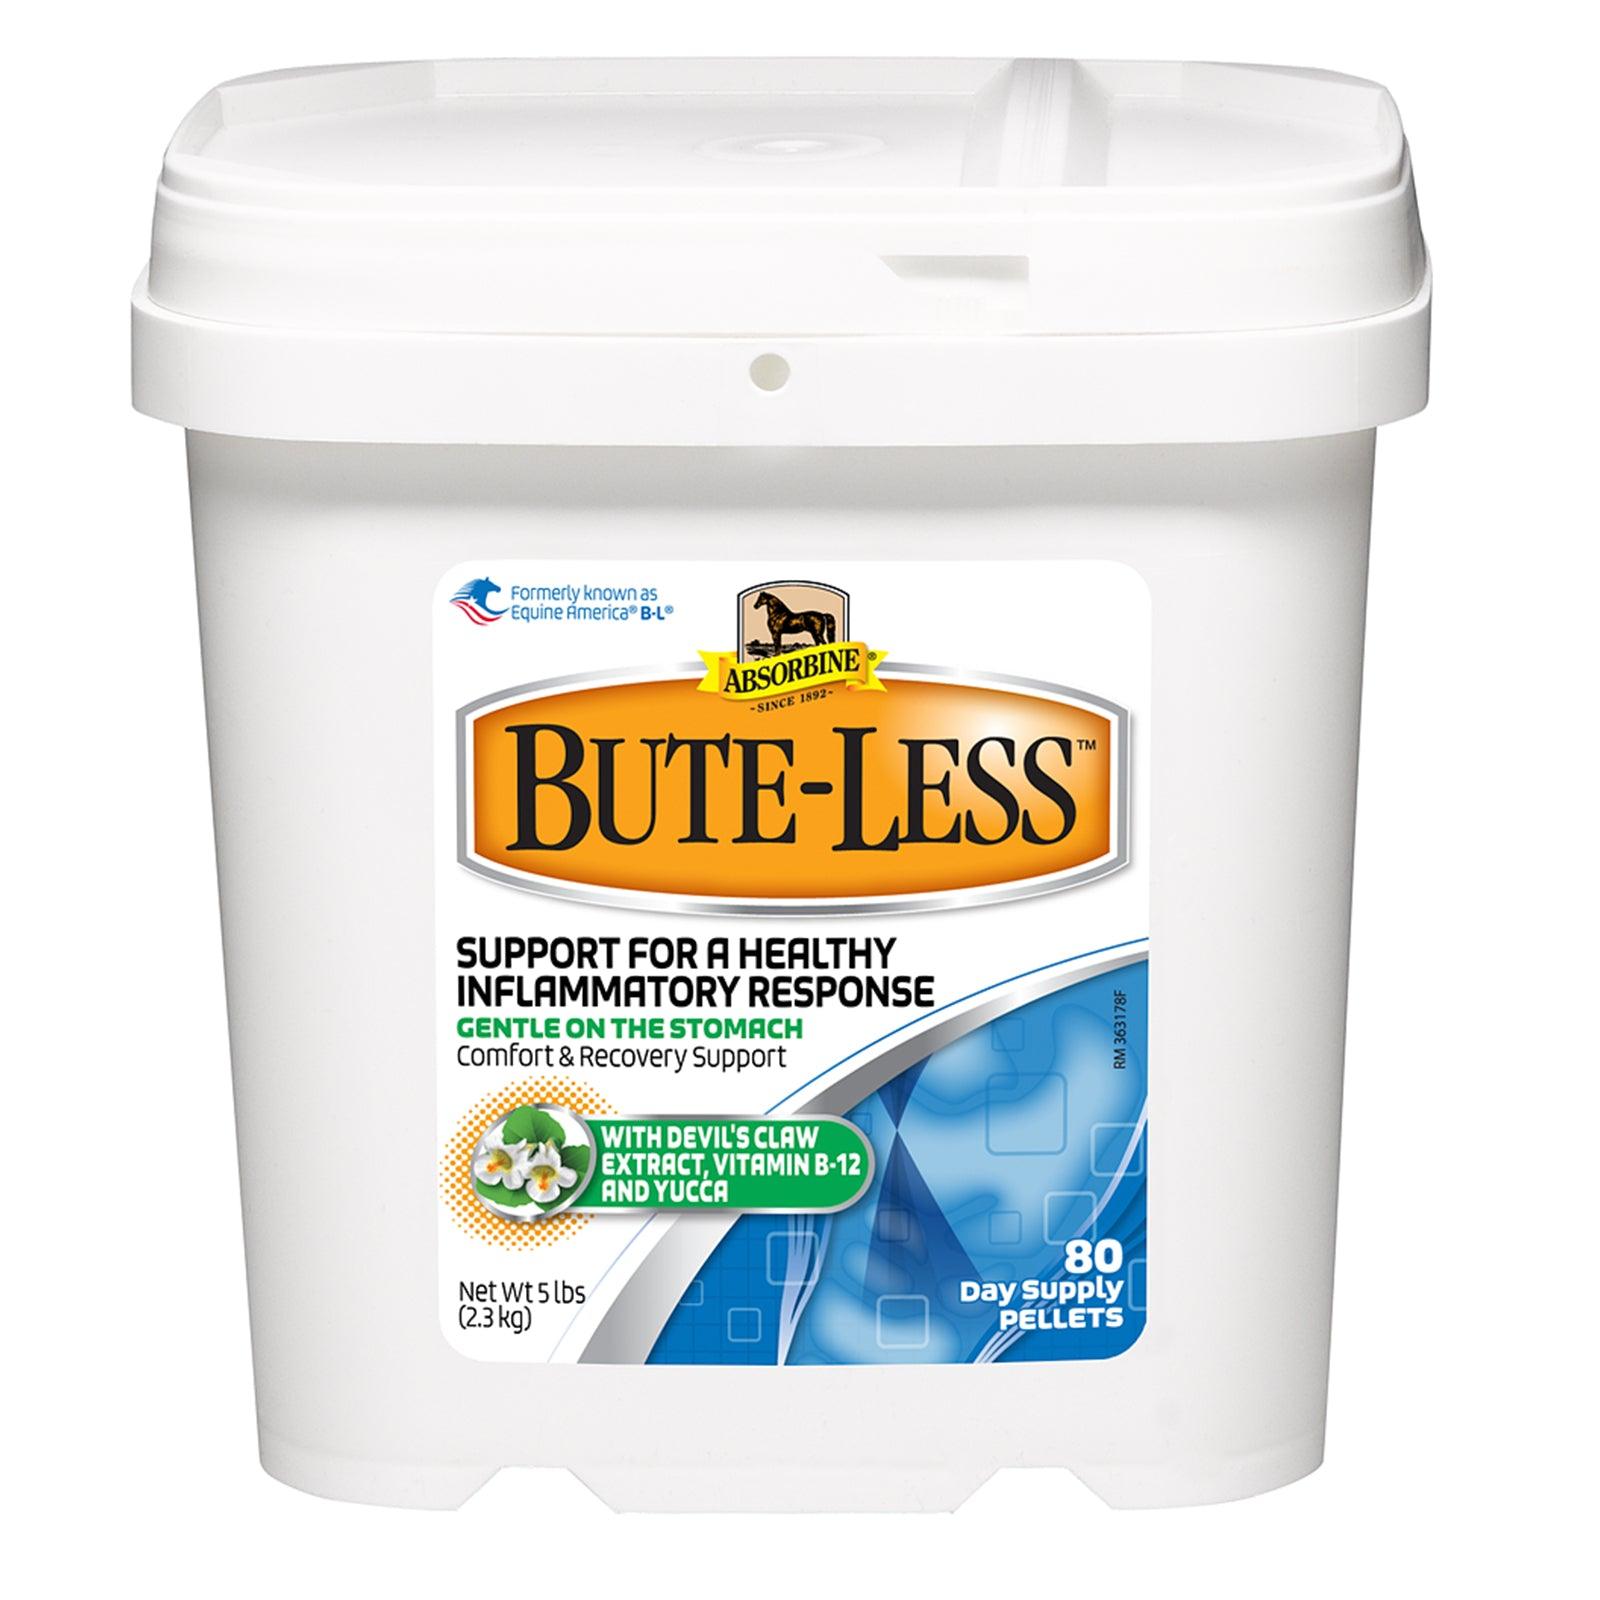 Bute-less supplement, support for a healthy inflammatory response 5 lb. bucket. 80 day supply of pellets.